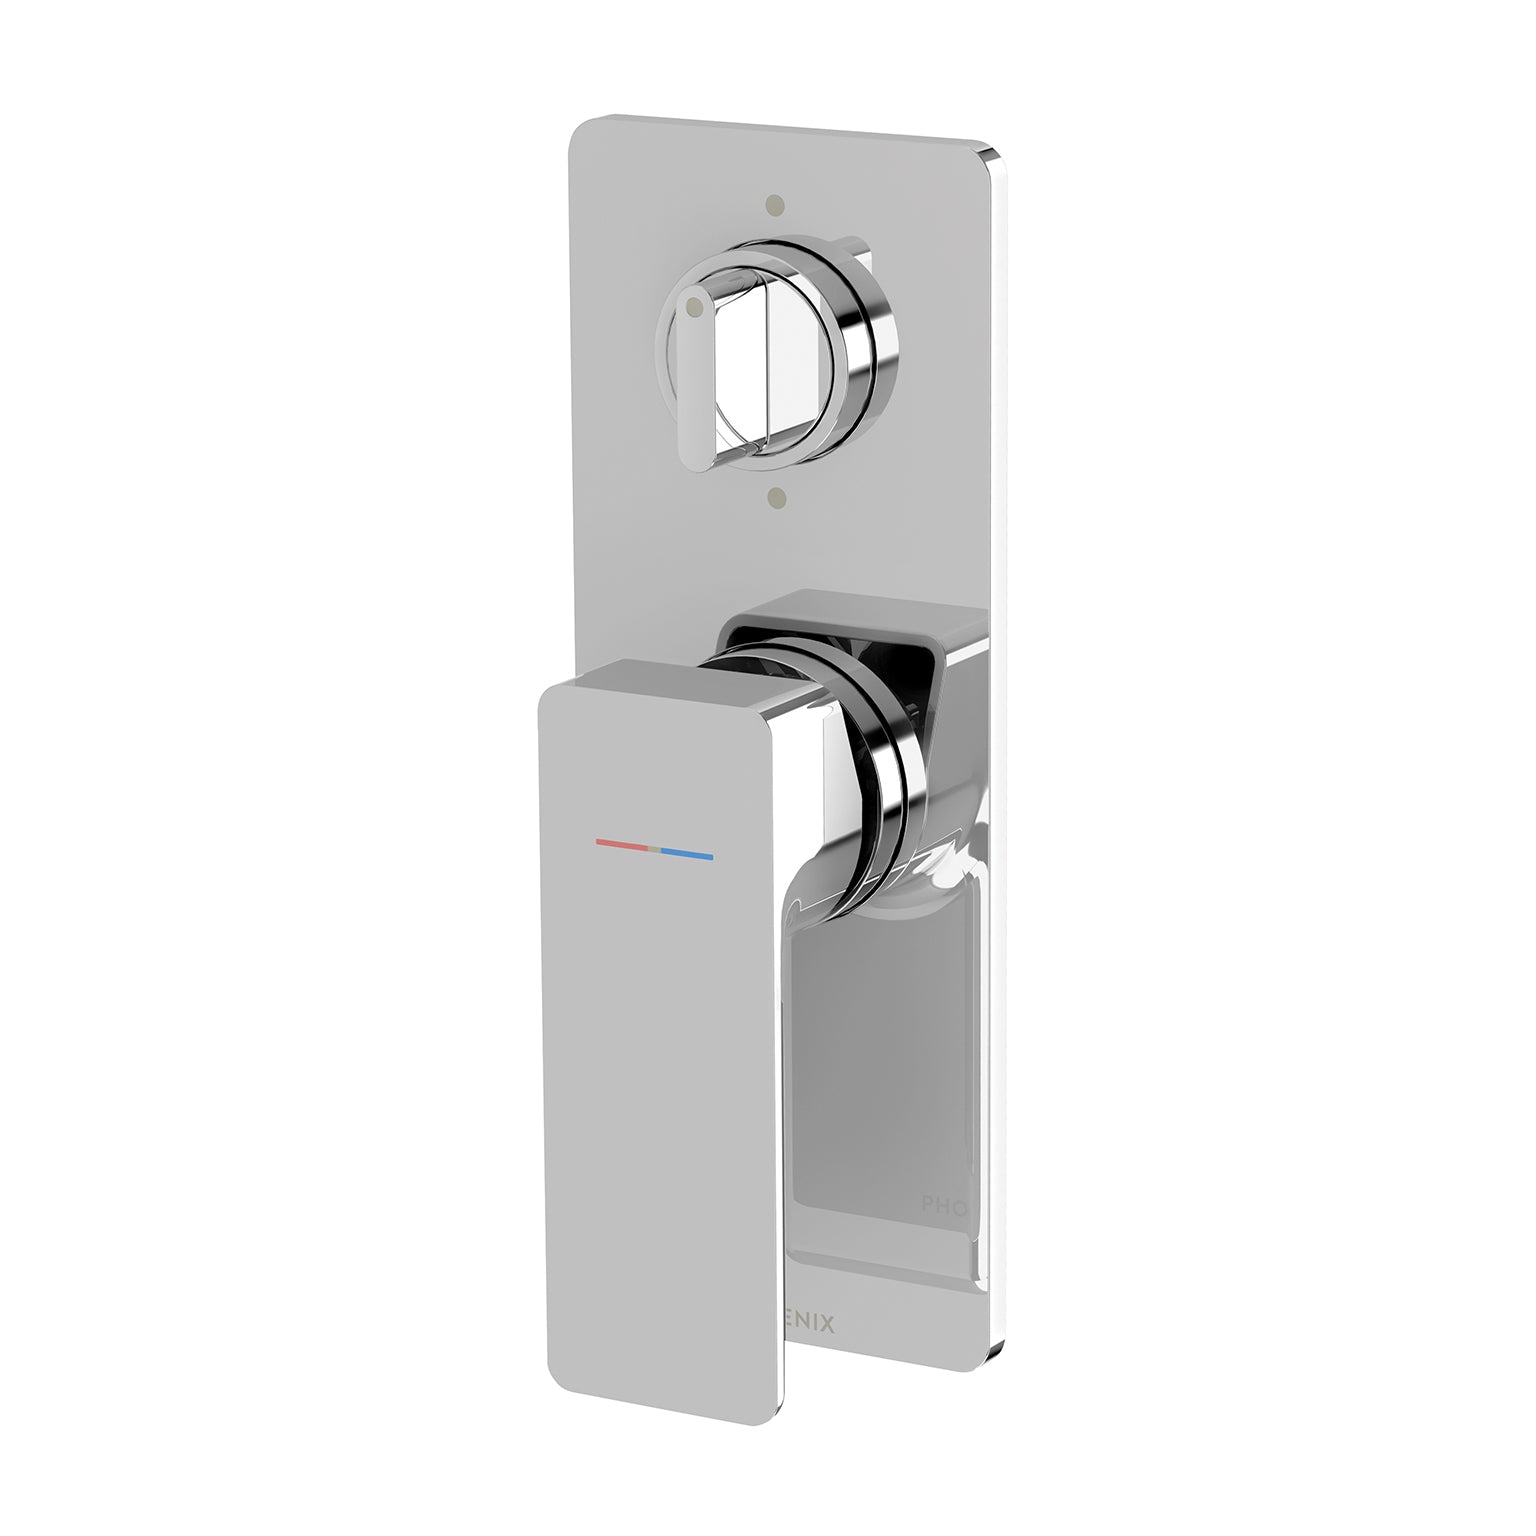 PHOENIX GLOSS MKII SWITCHMIX SHOWER / BATH DIVERTER MIXER FIT-OFF AND ROUGH-IN KIT CHROME